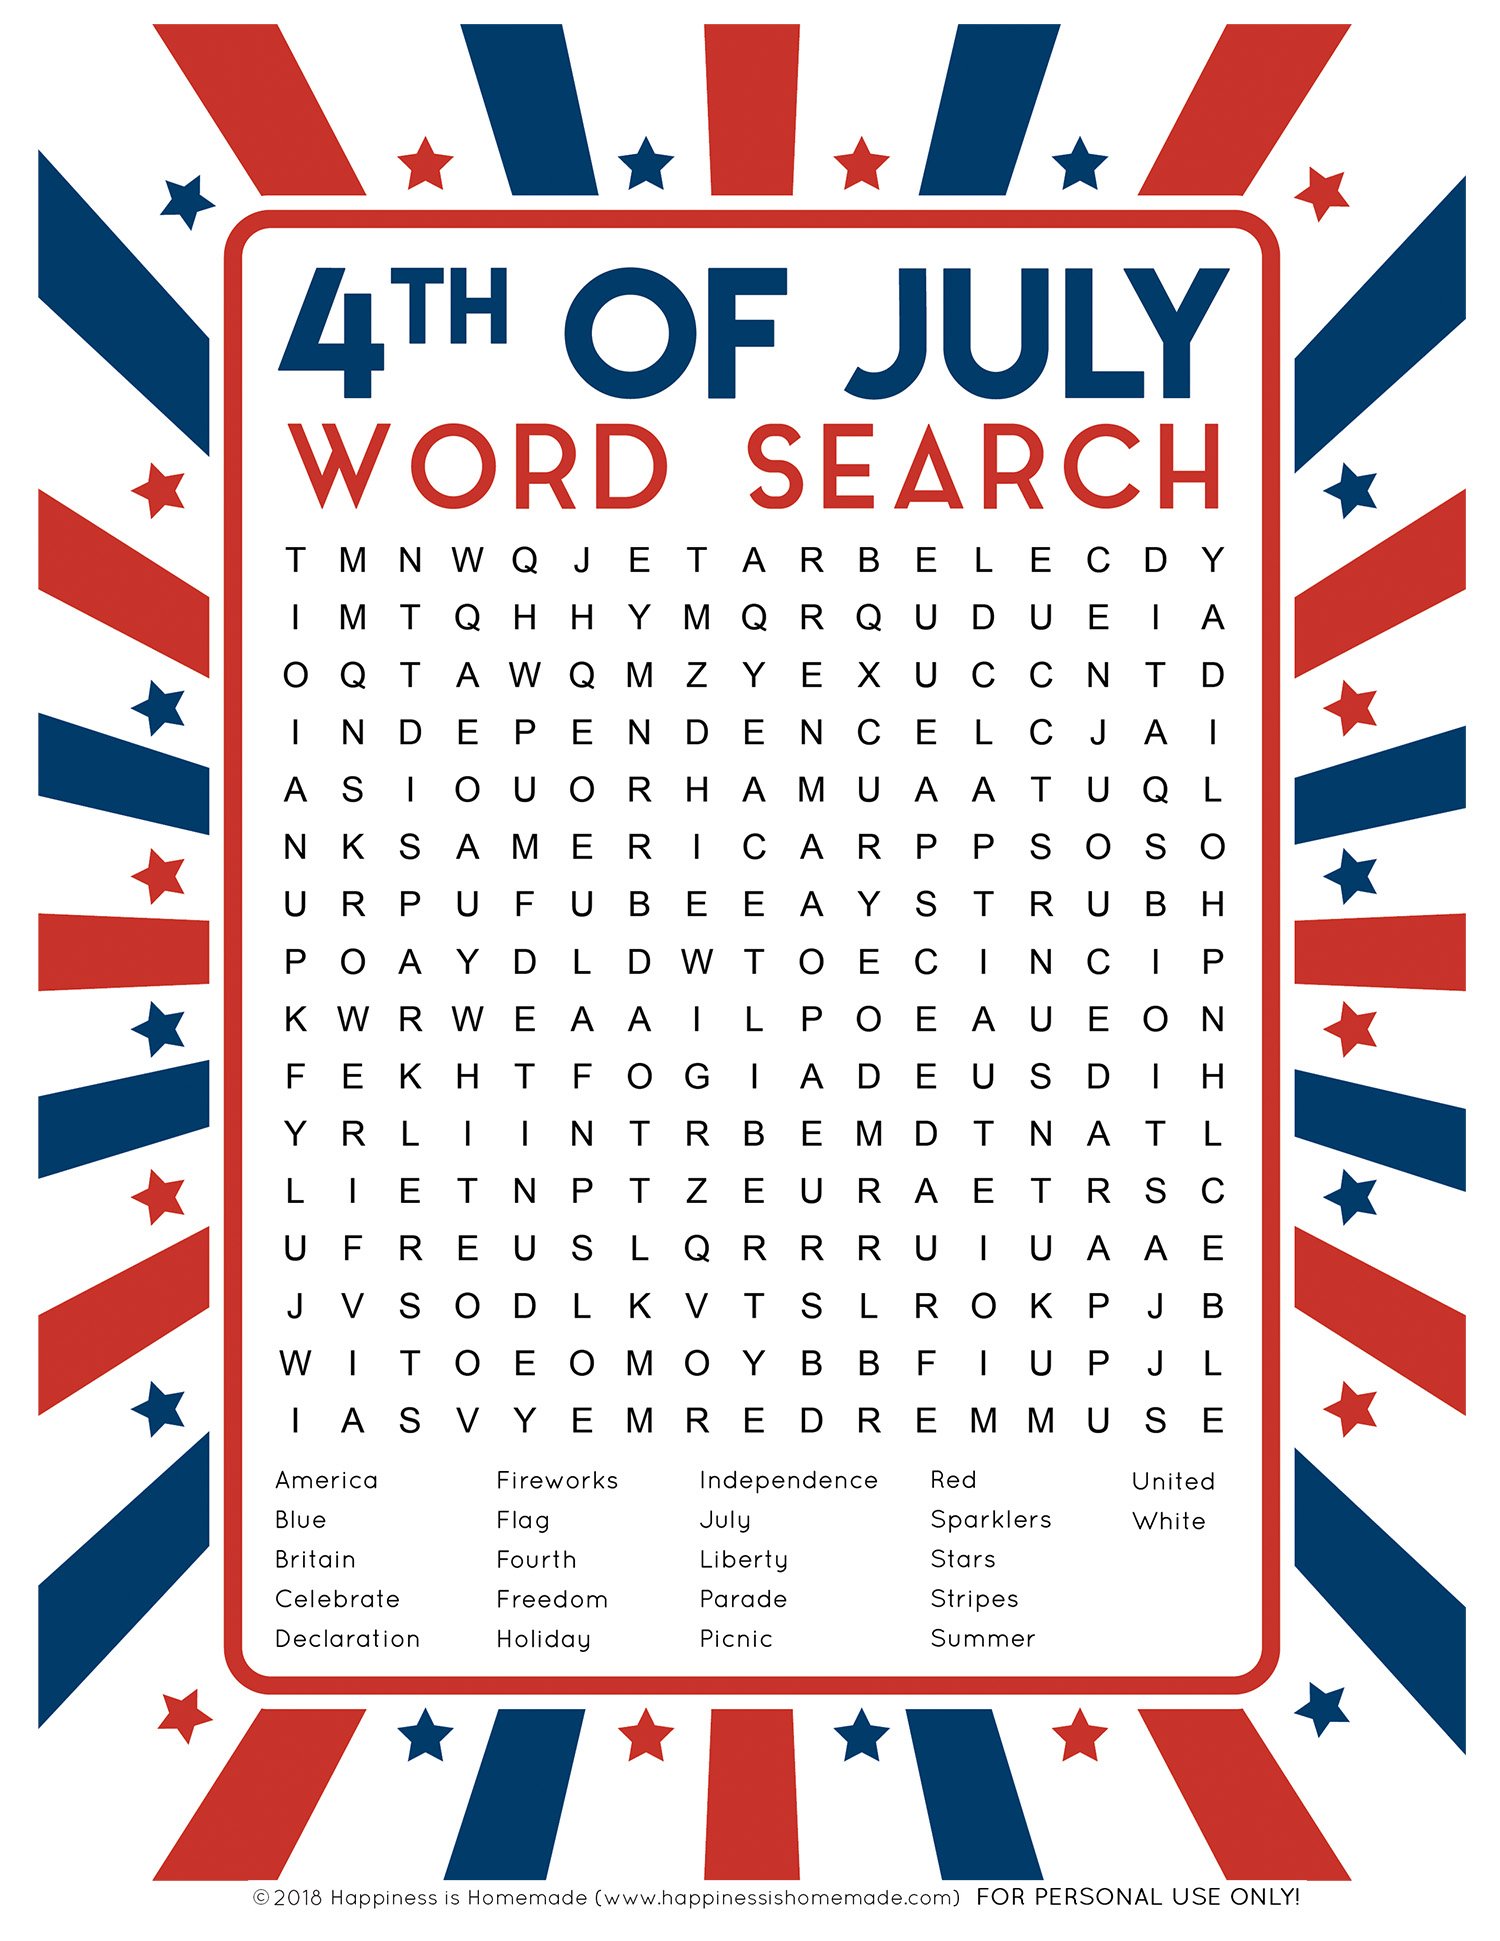 4th of July Word Search Printable Happiness is Homemade